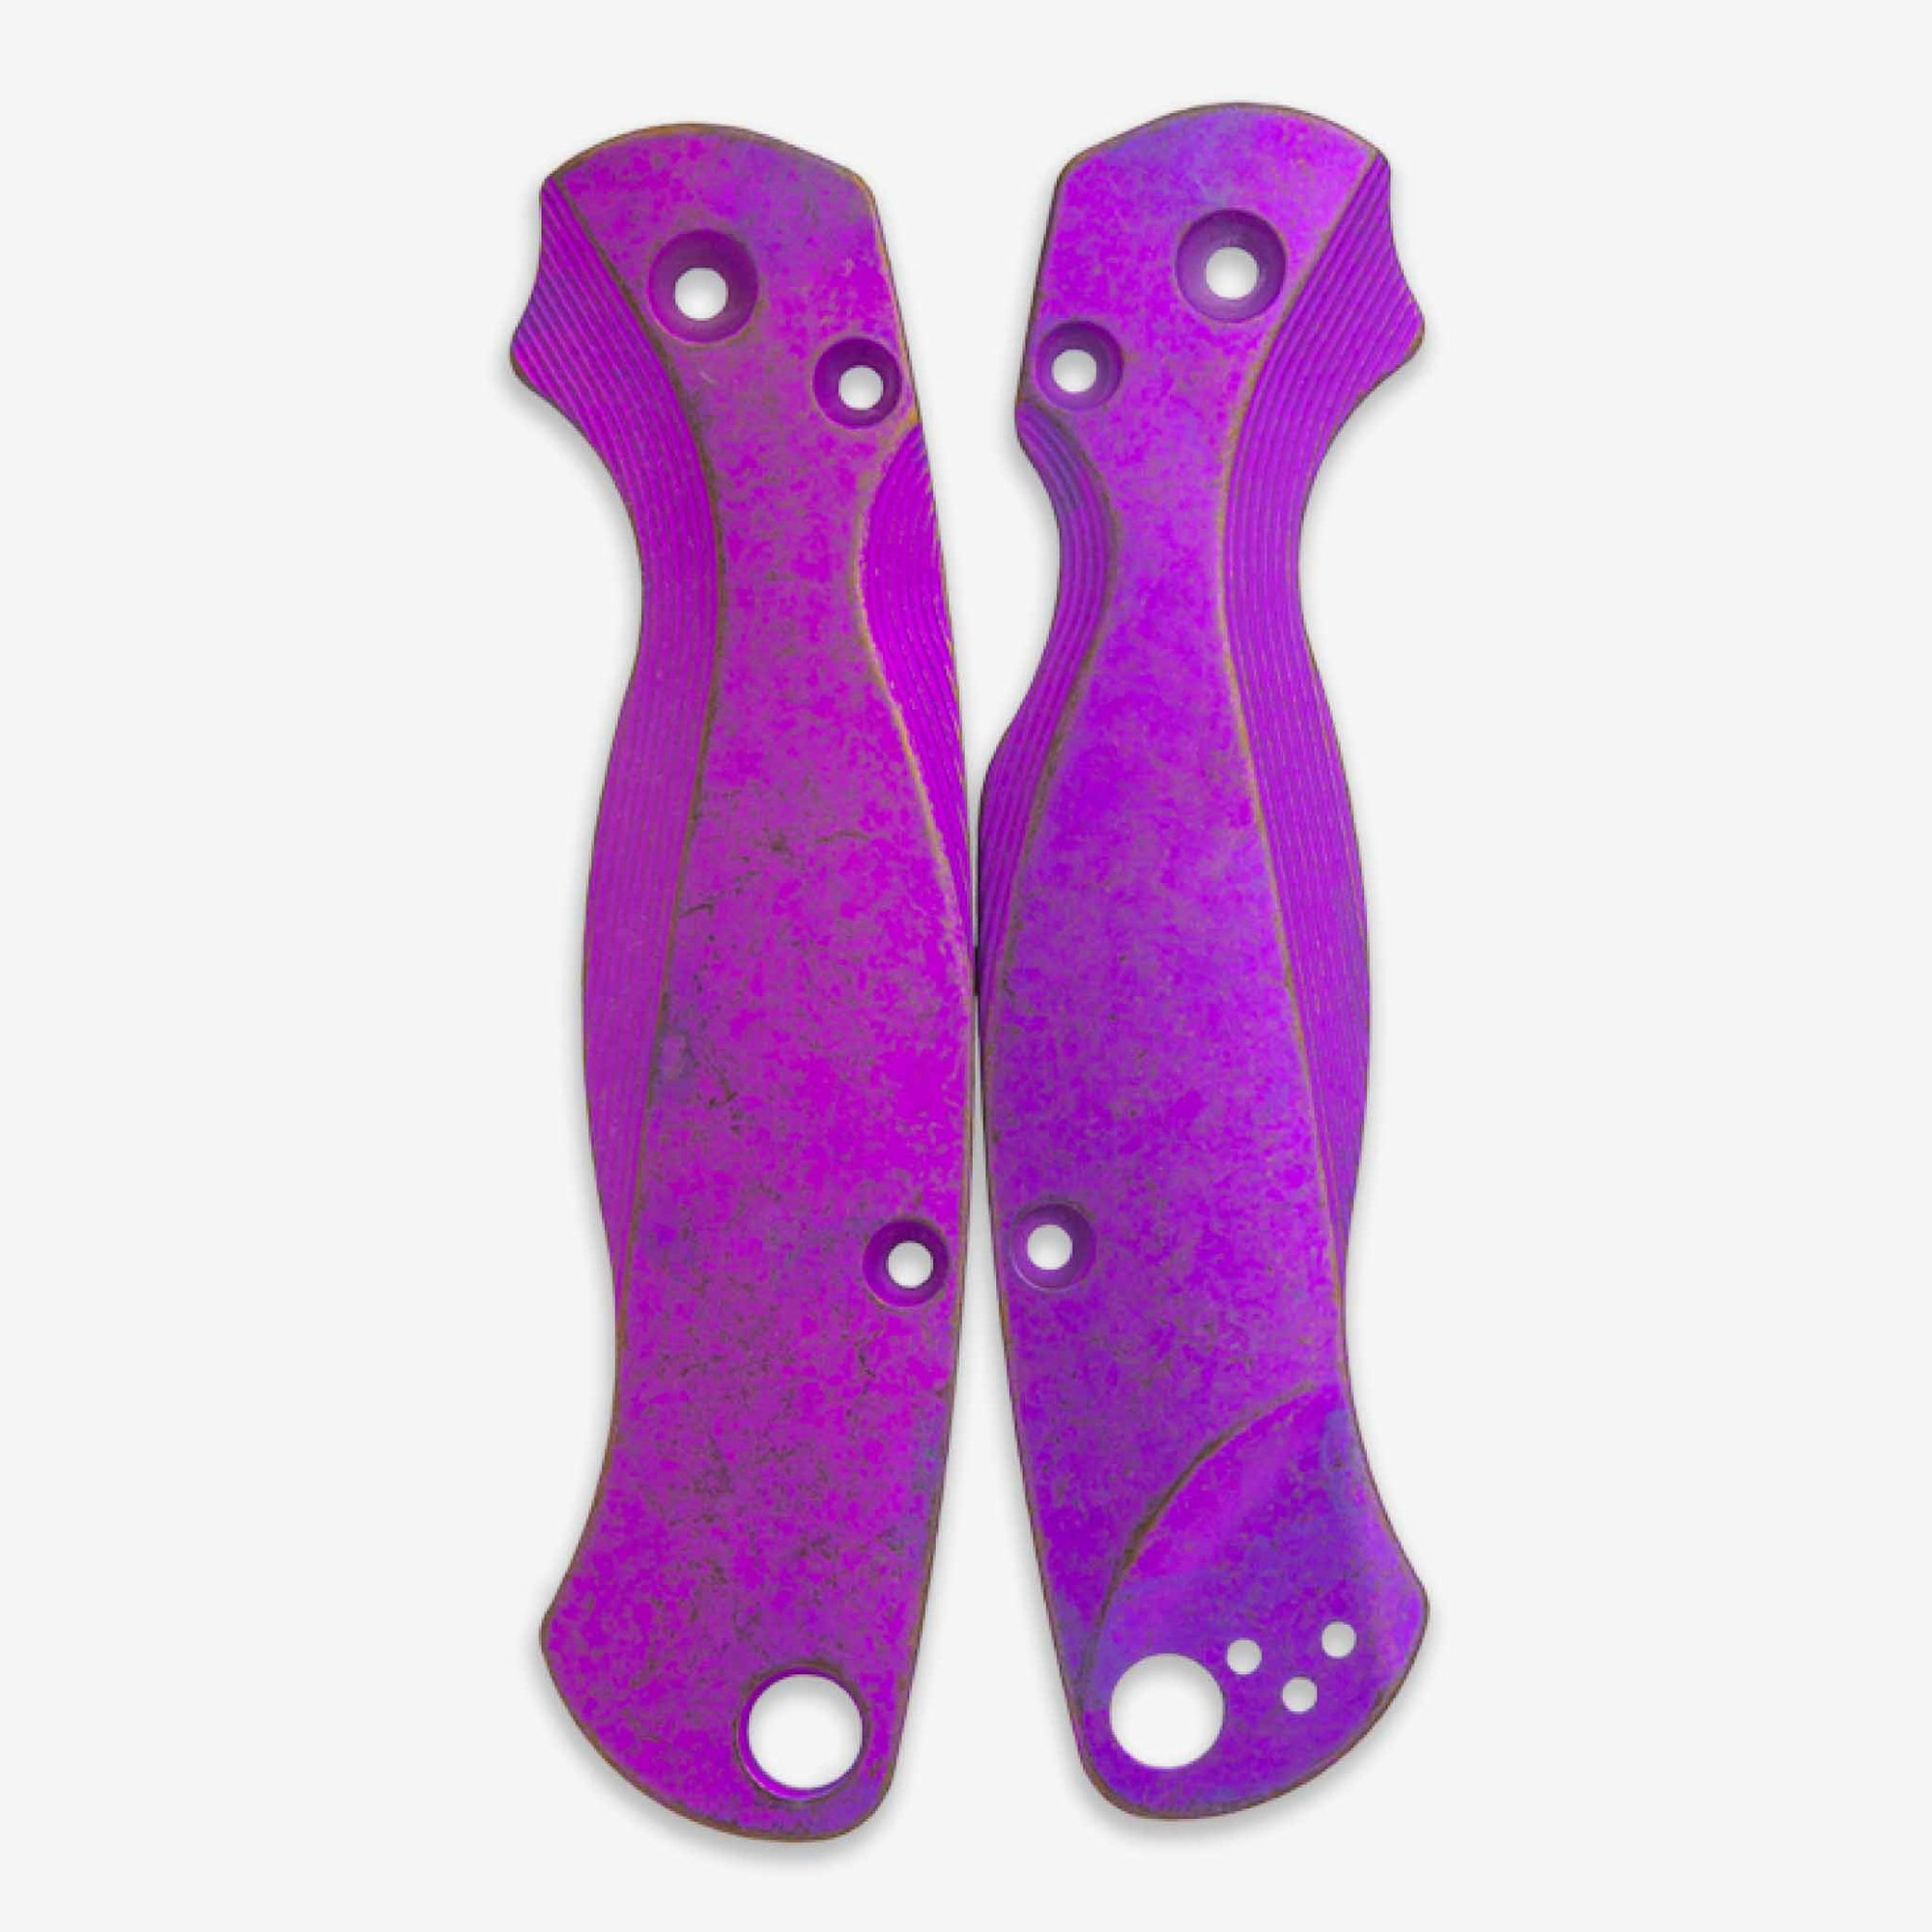 Spyderco Paramilitary 2 scales in the limited edition Venus finish, which is a mix of purple and hints of bronze.